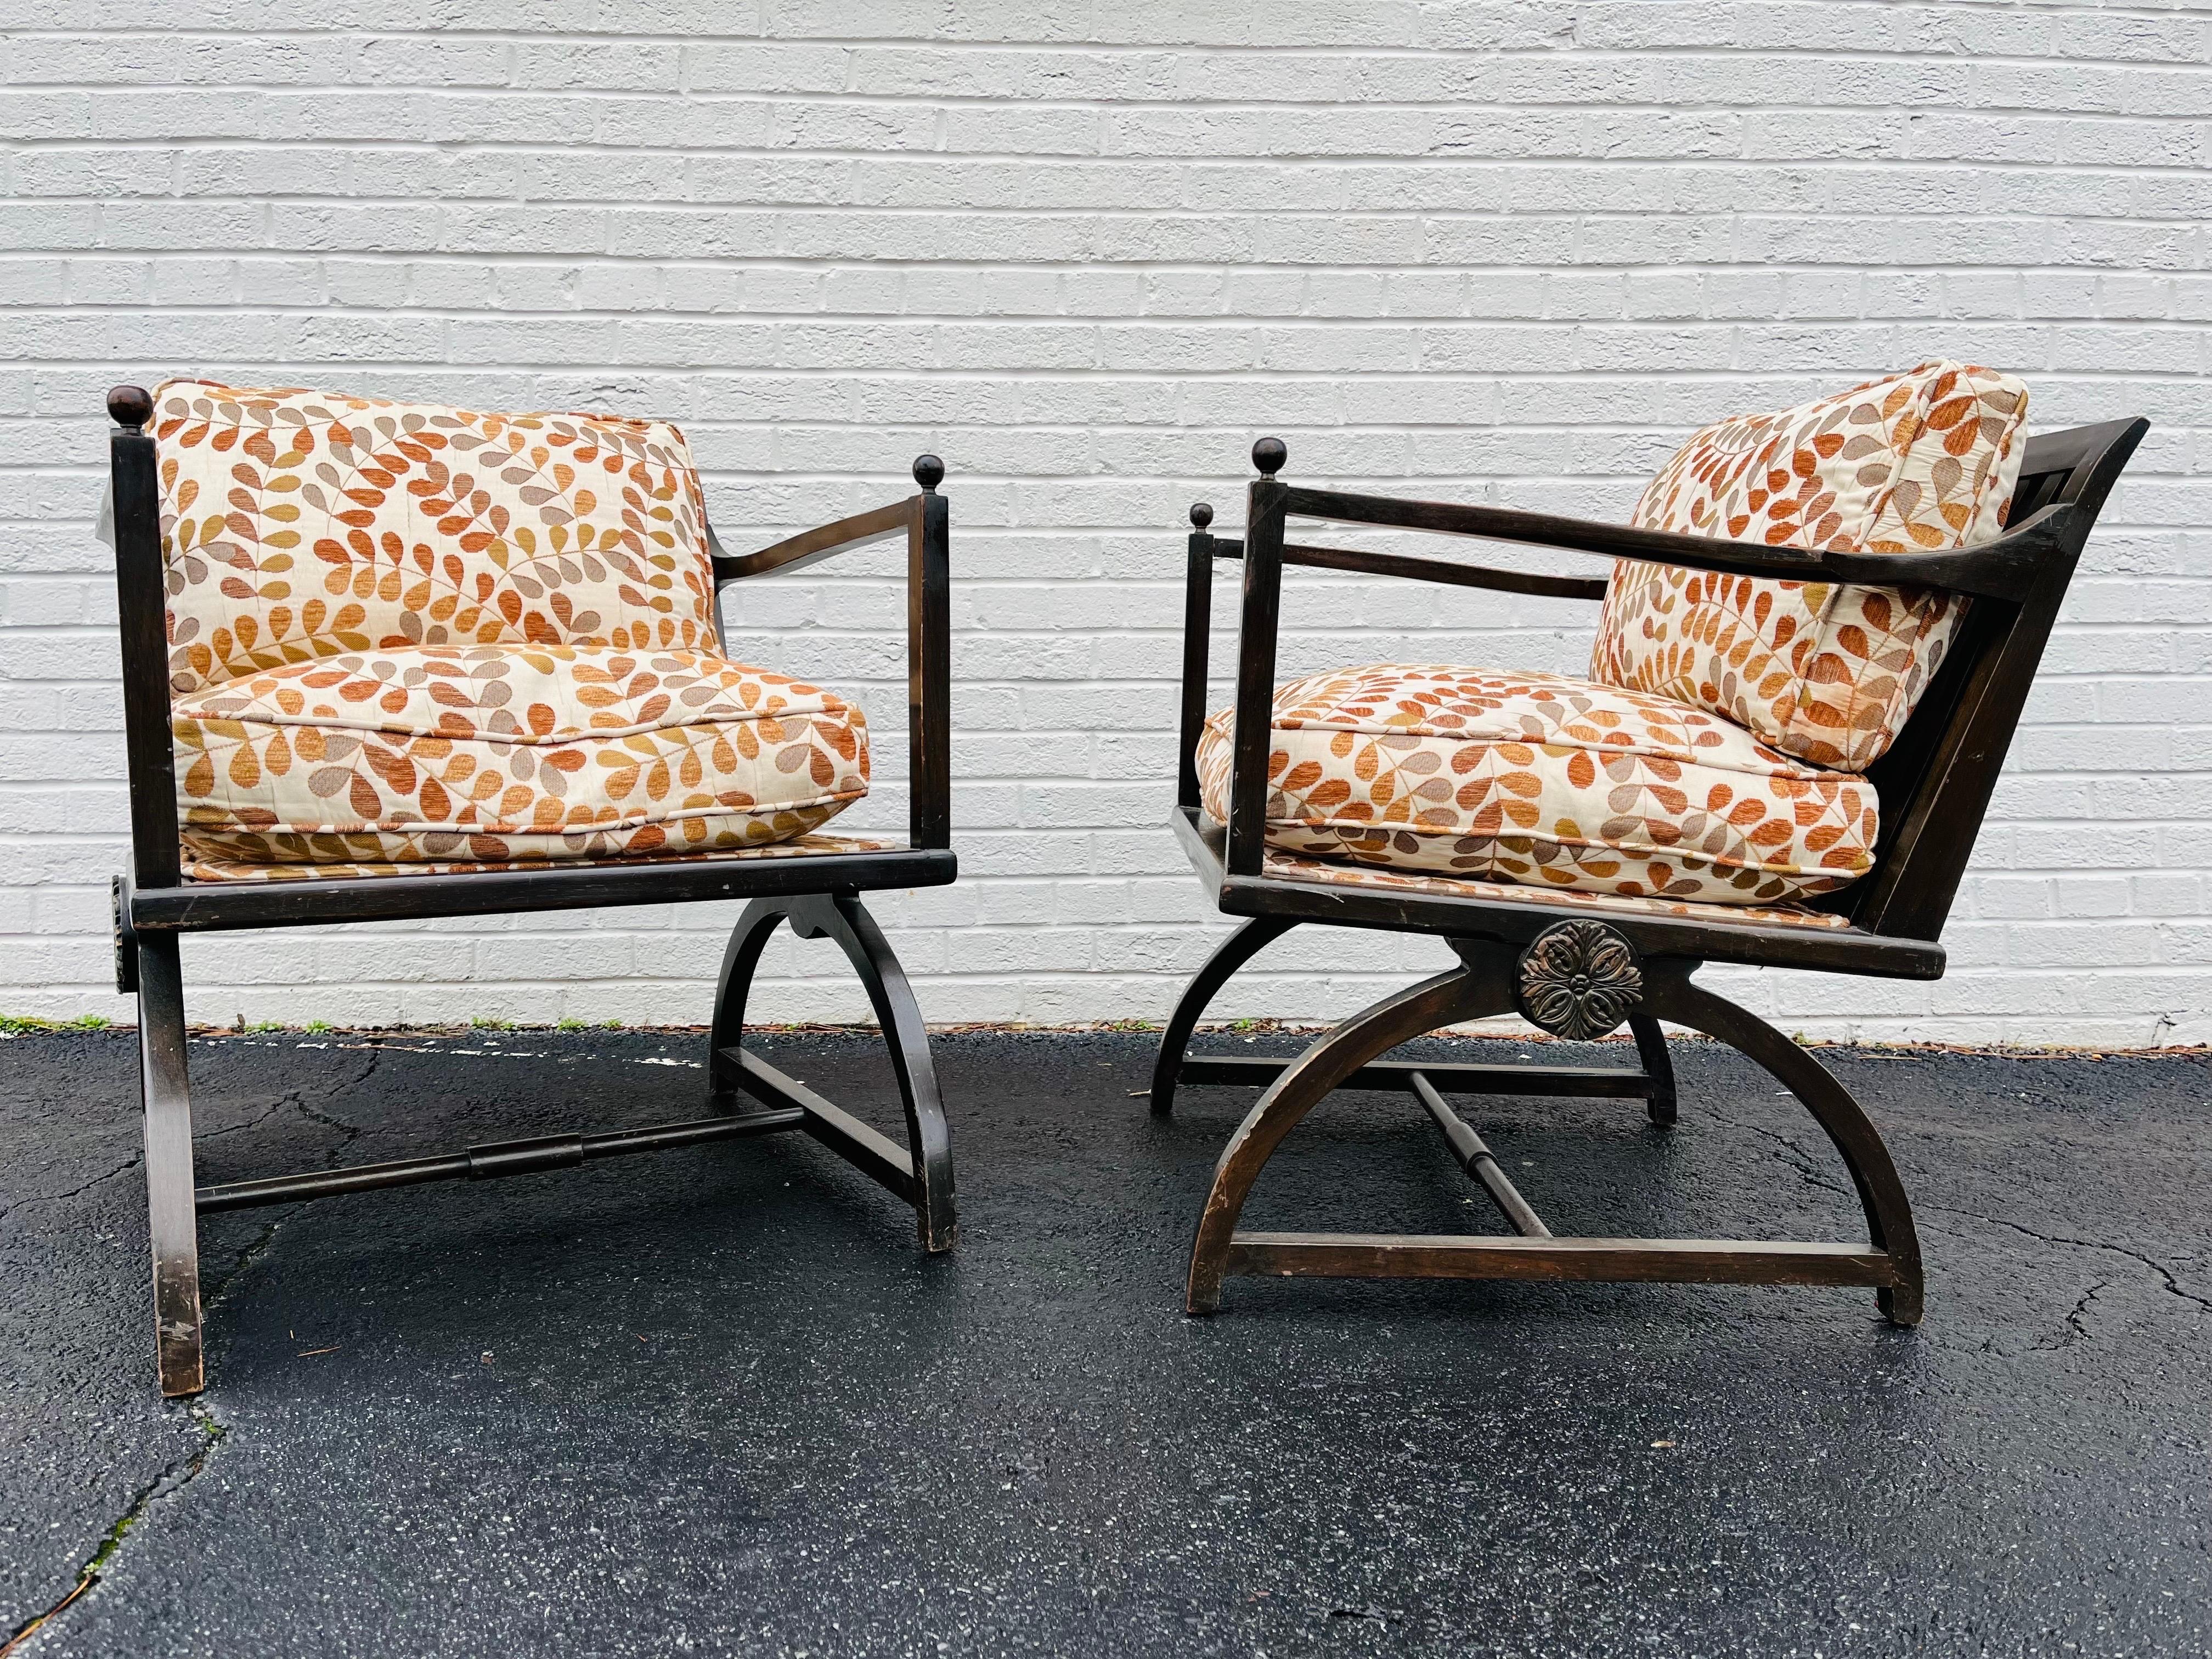 American Pair of Interesting Wood Slat Arm Chairs with a Vienna Secession Sensibility For Sale